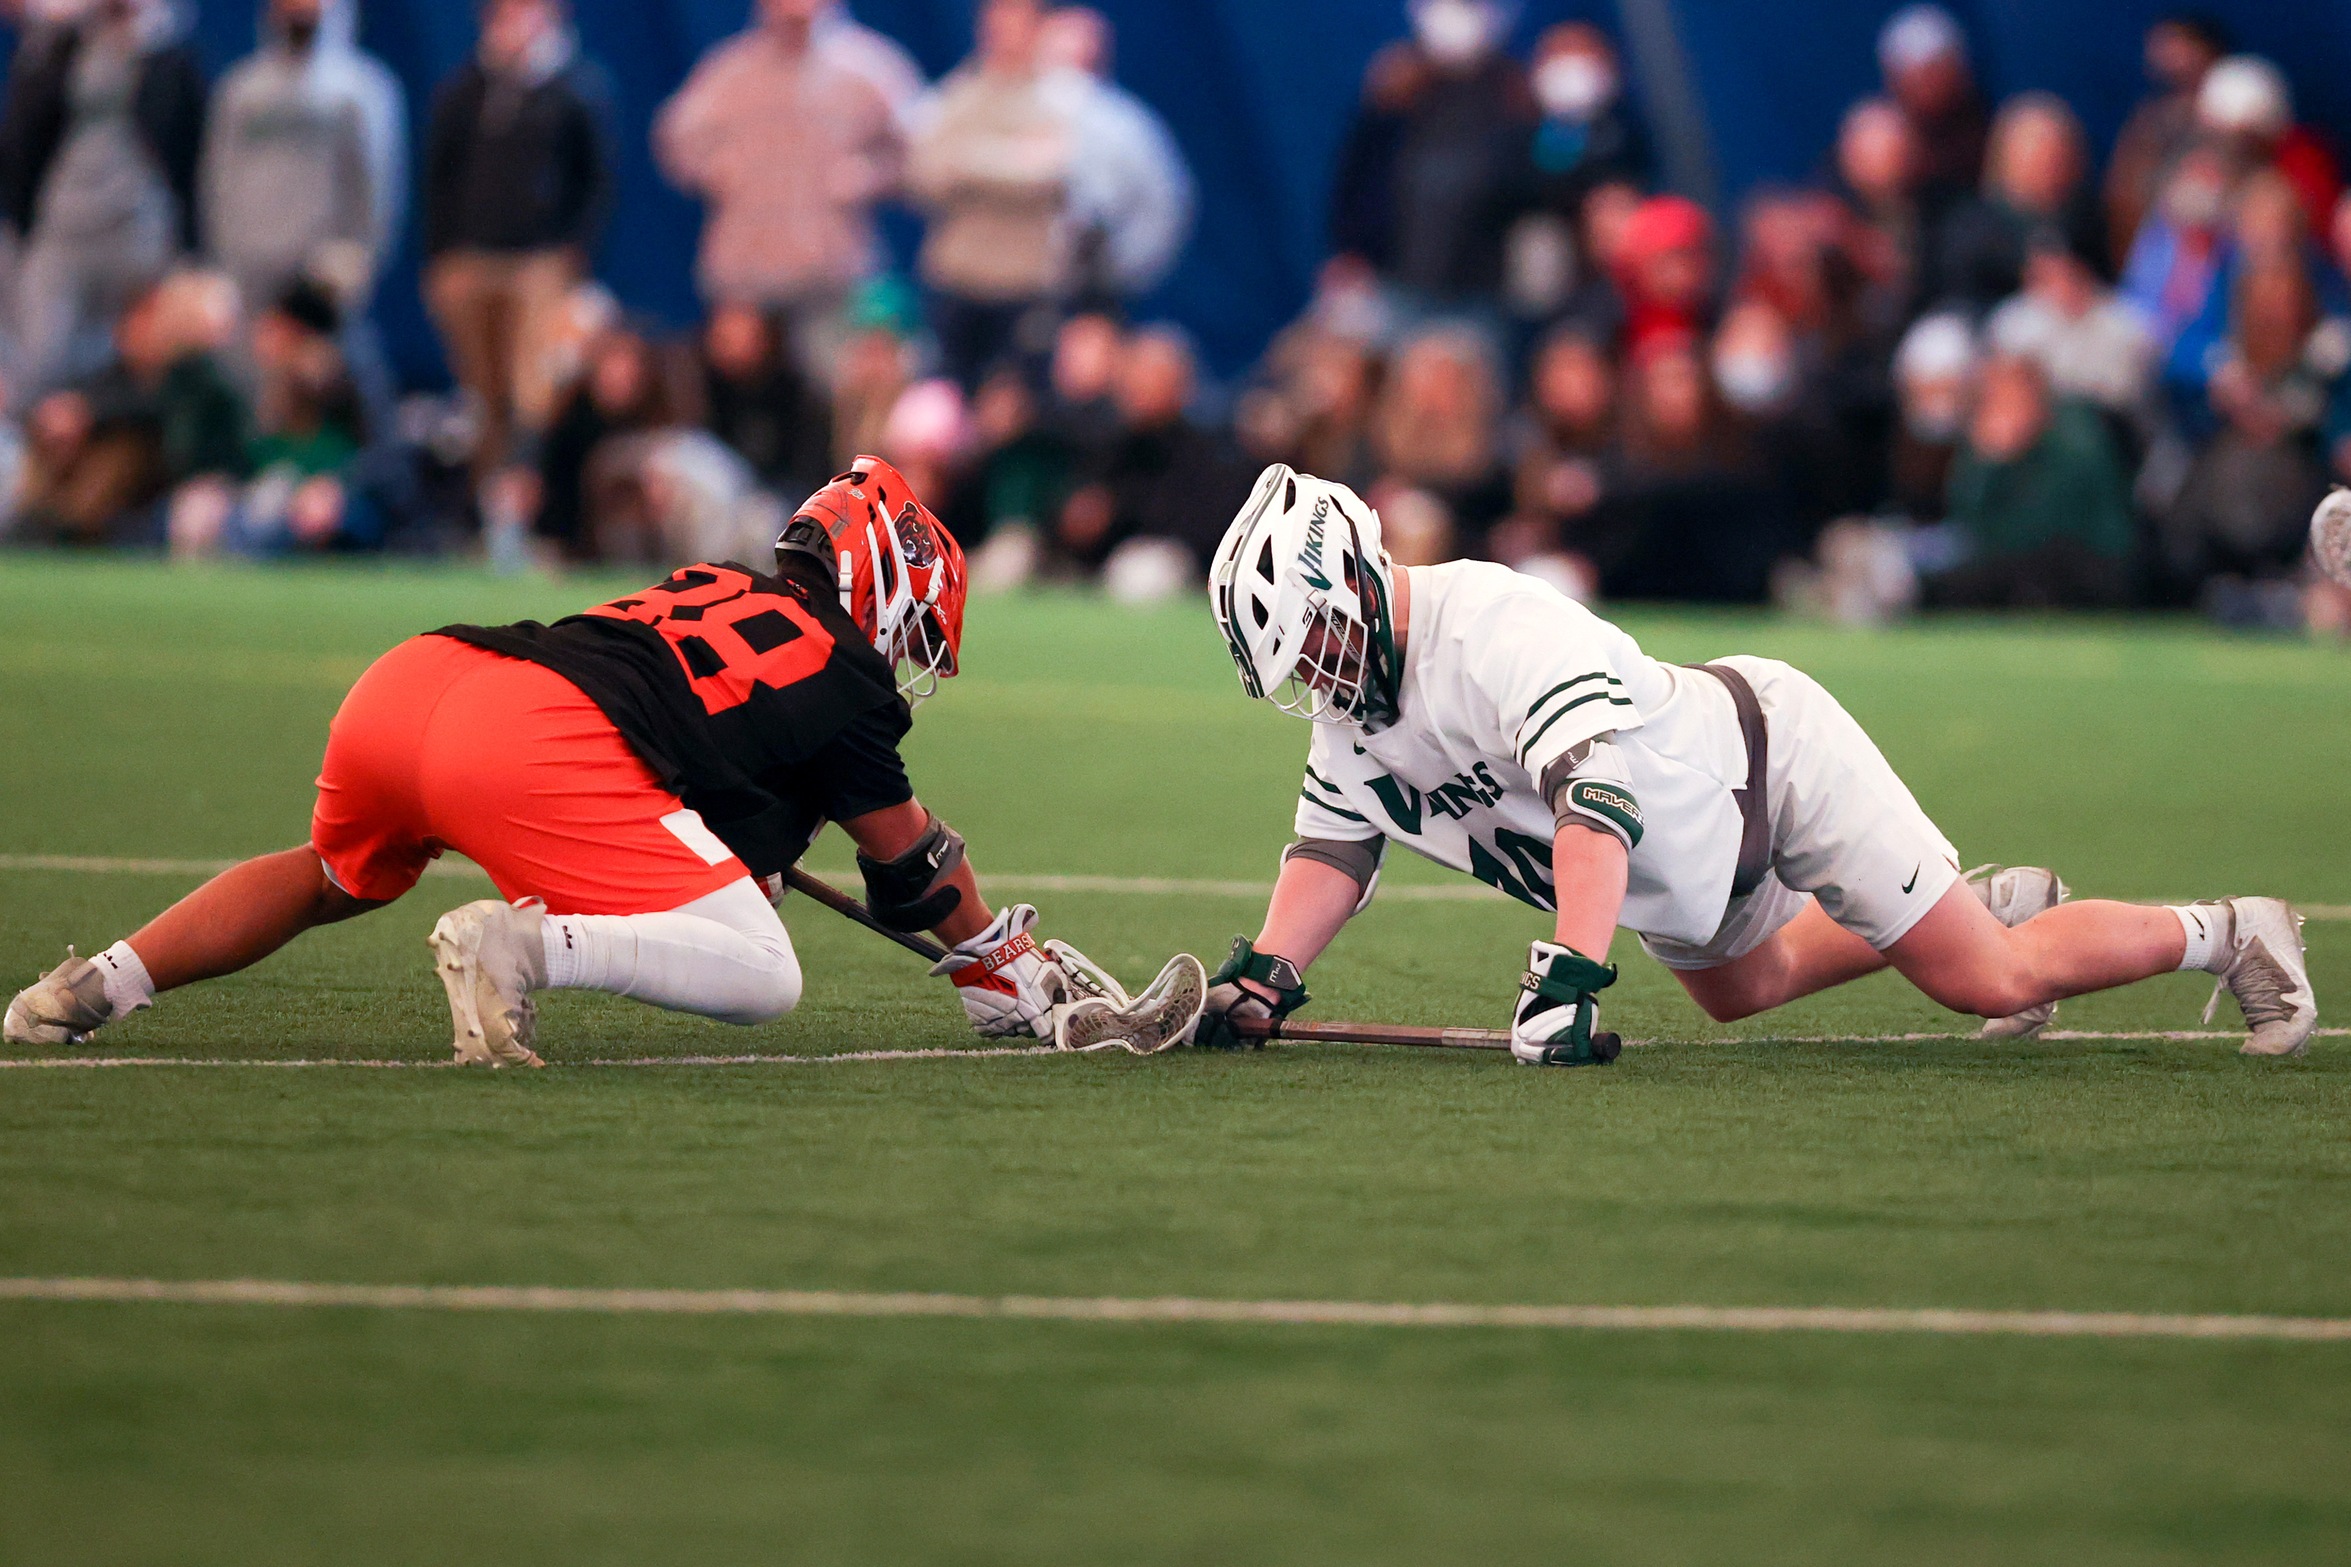 Cleveland State Lacrosse Drops Front End of Home-and-Home With St. Bonaventure